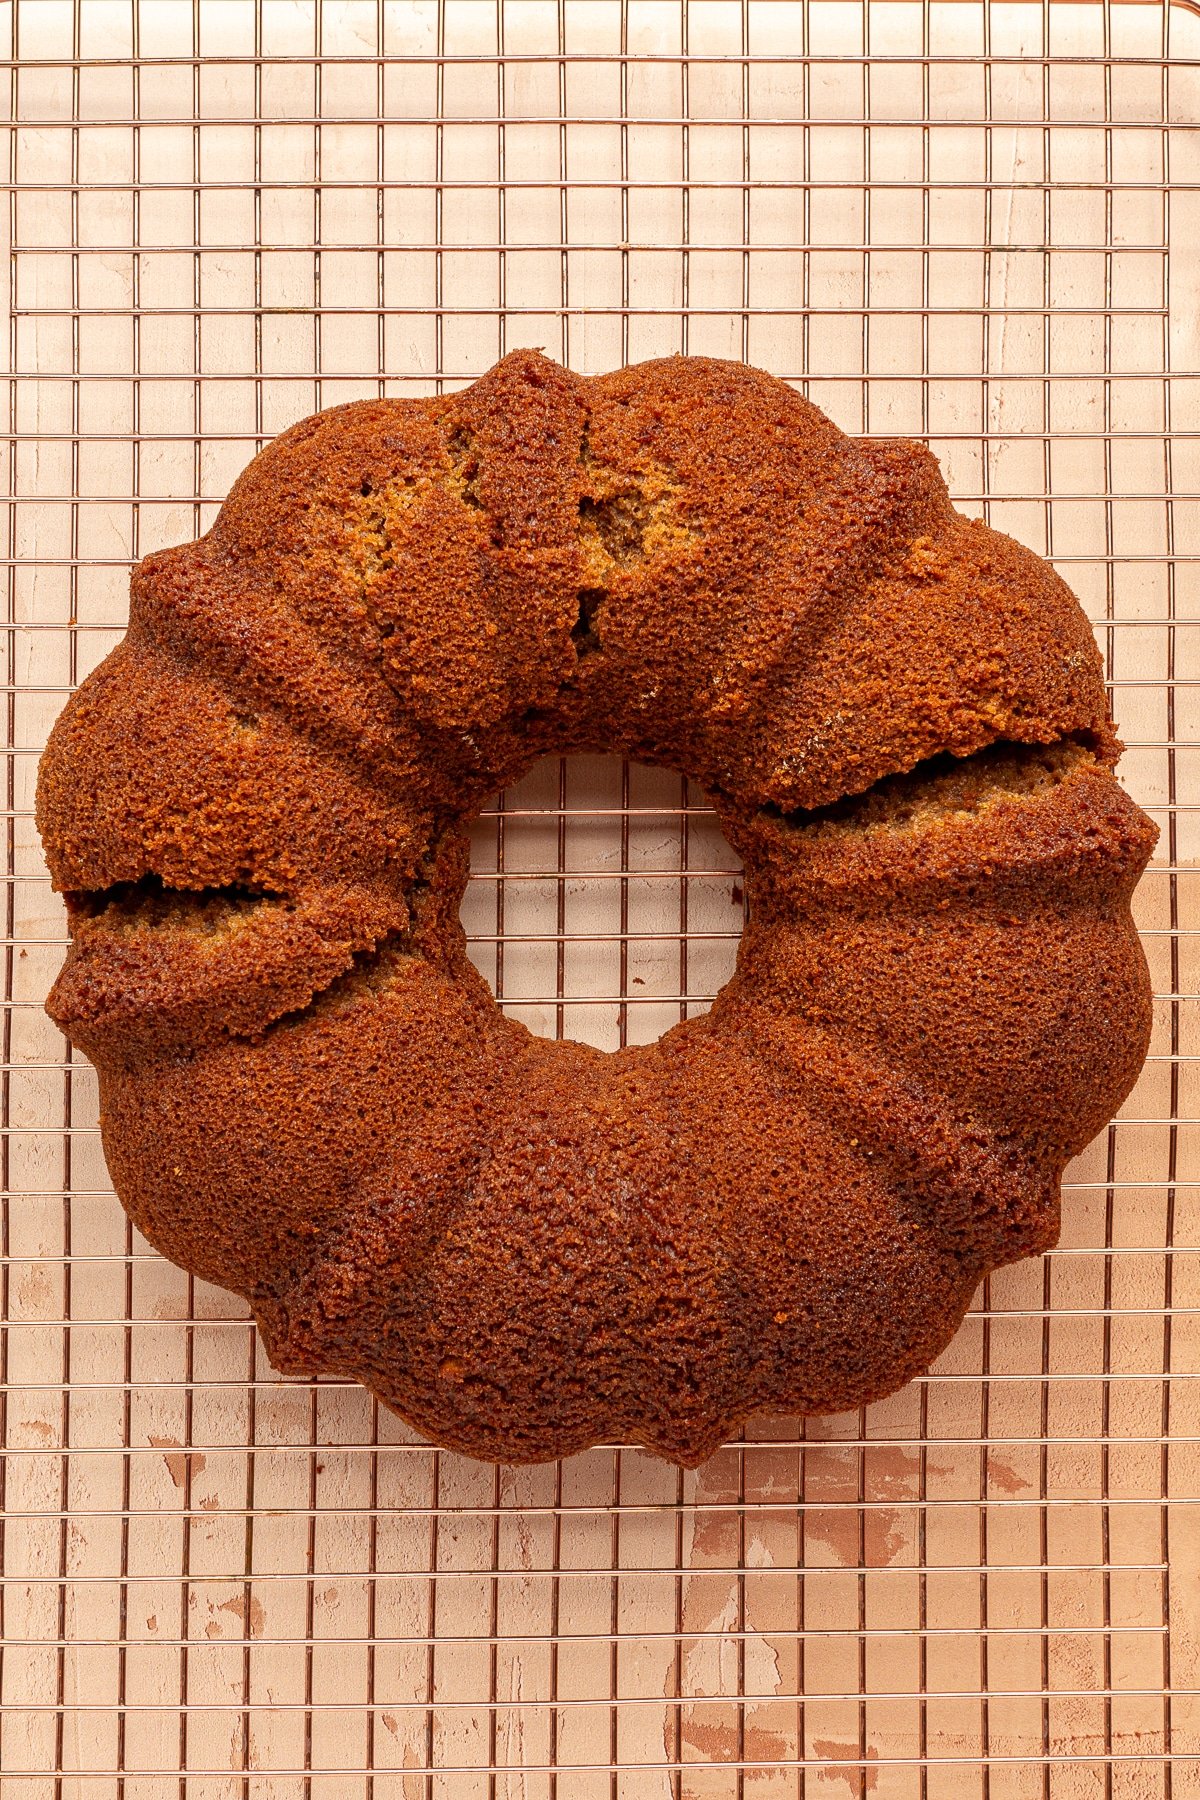 A pumpkin spice bundt cake, without the crumble or icing, cooling on a wire rack.